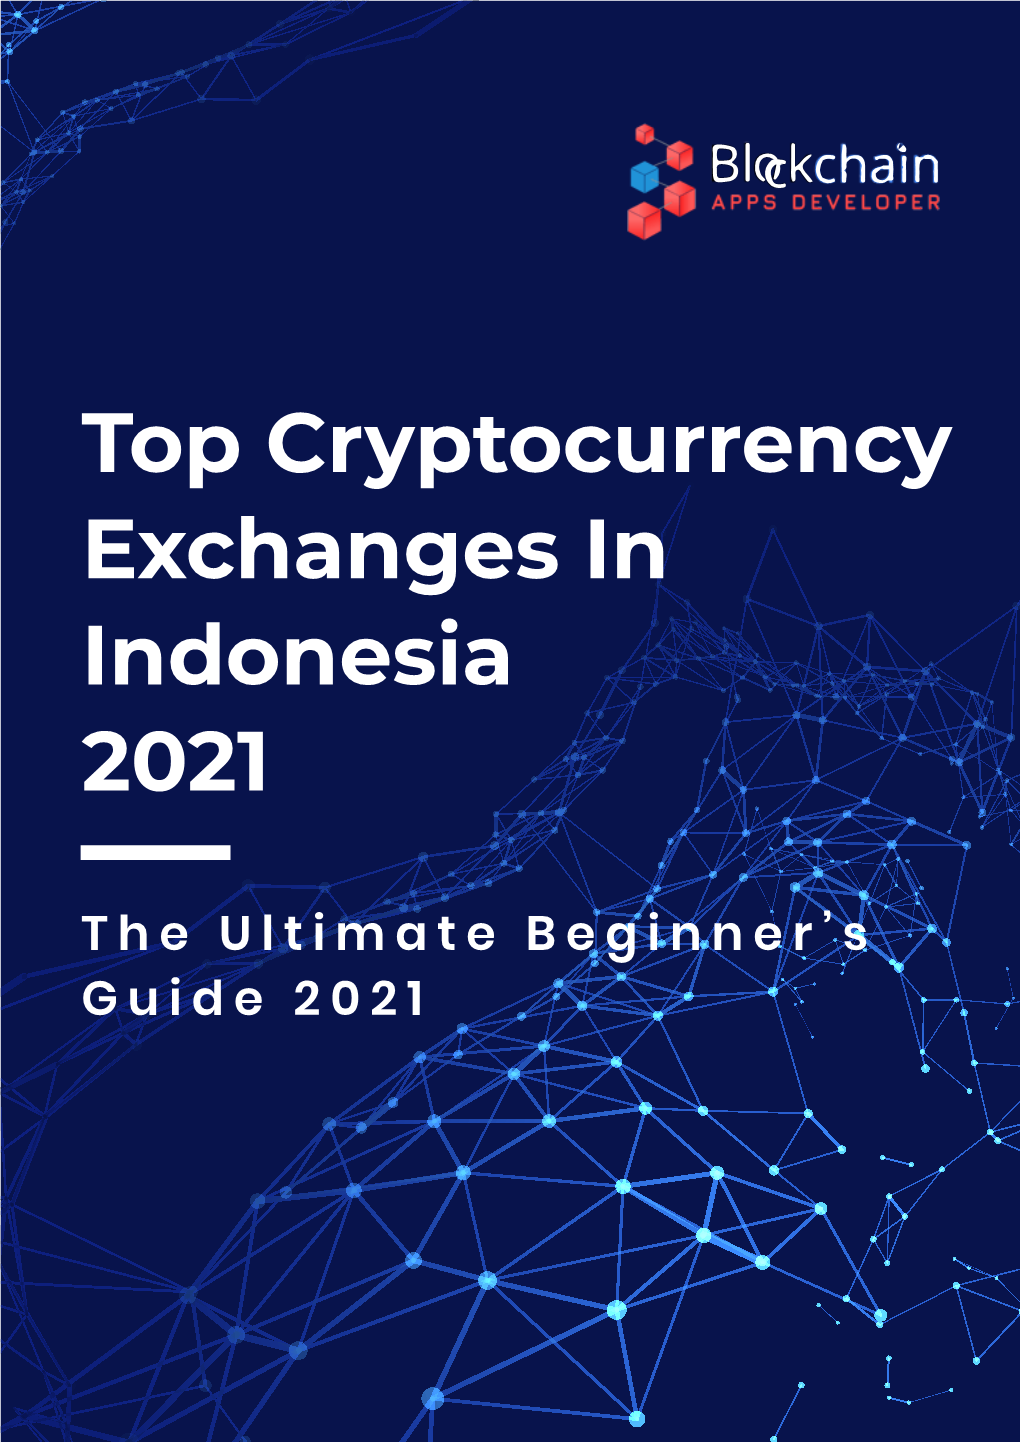 Top Cryptocurrency Exchanges in Indonesia 2021